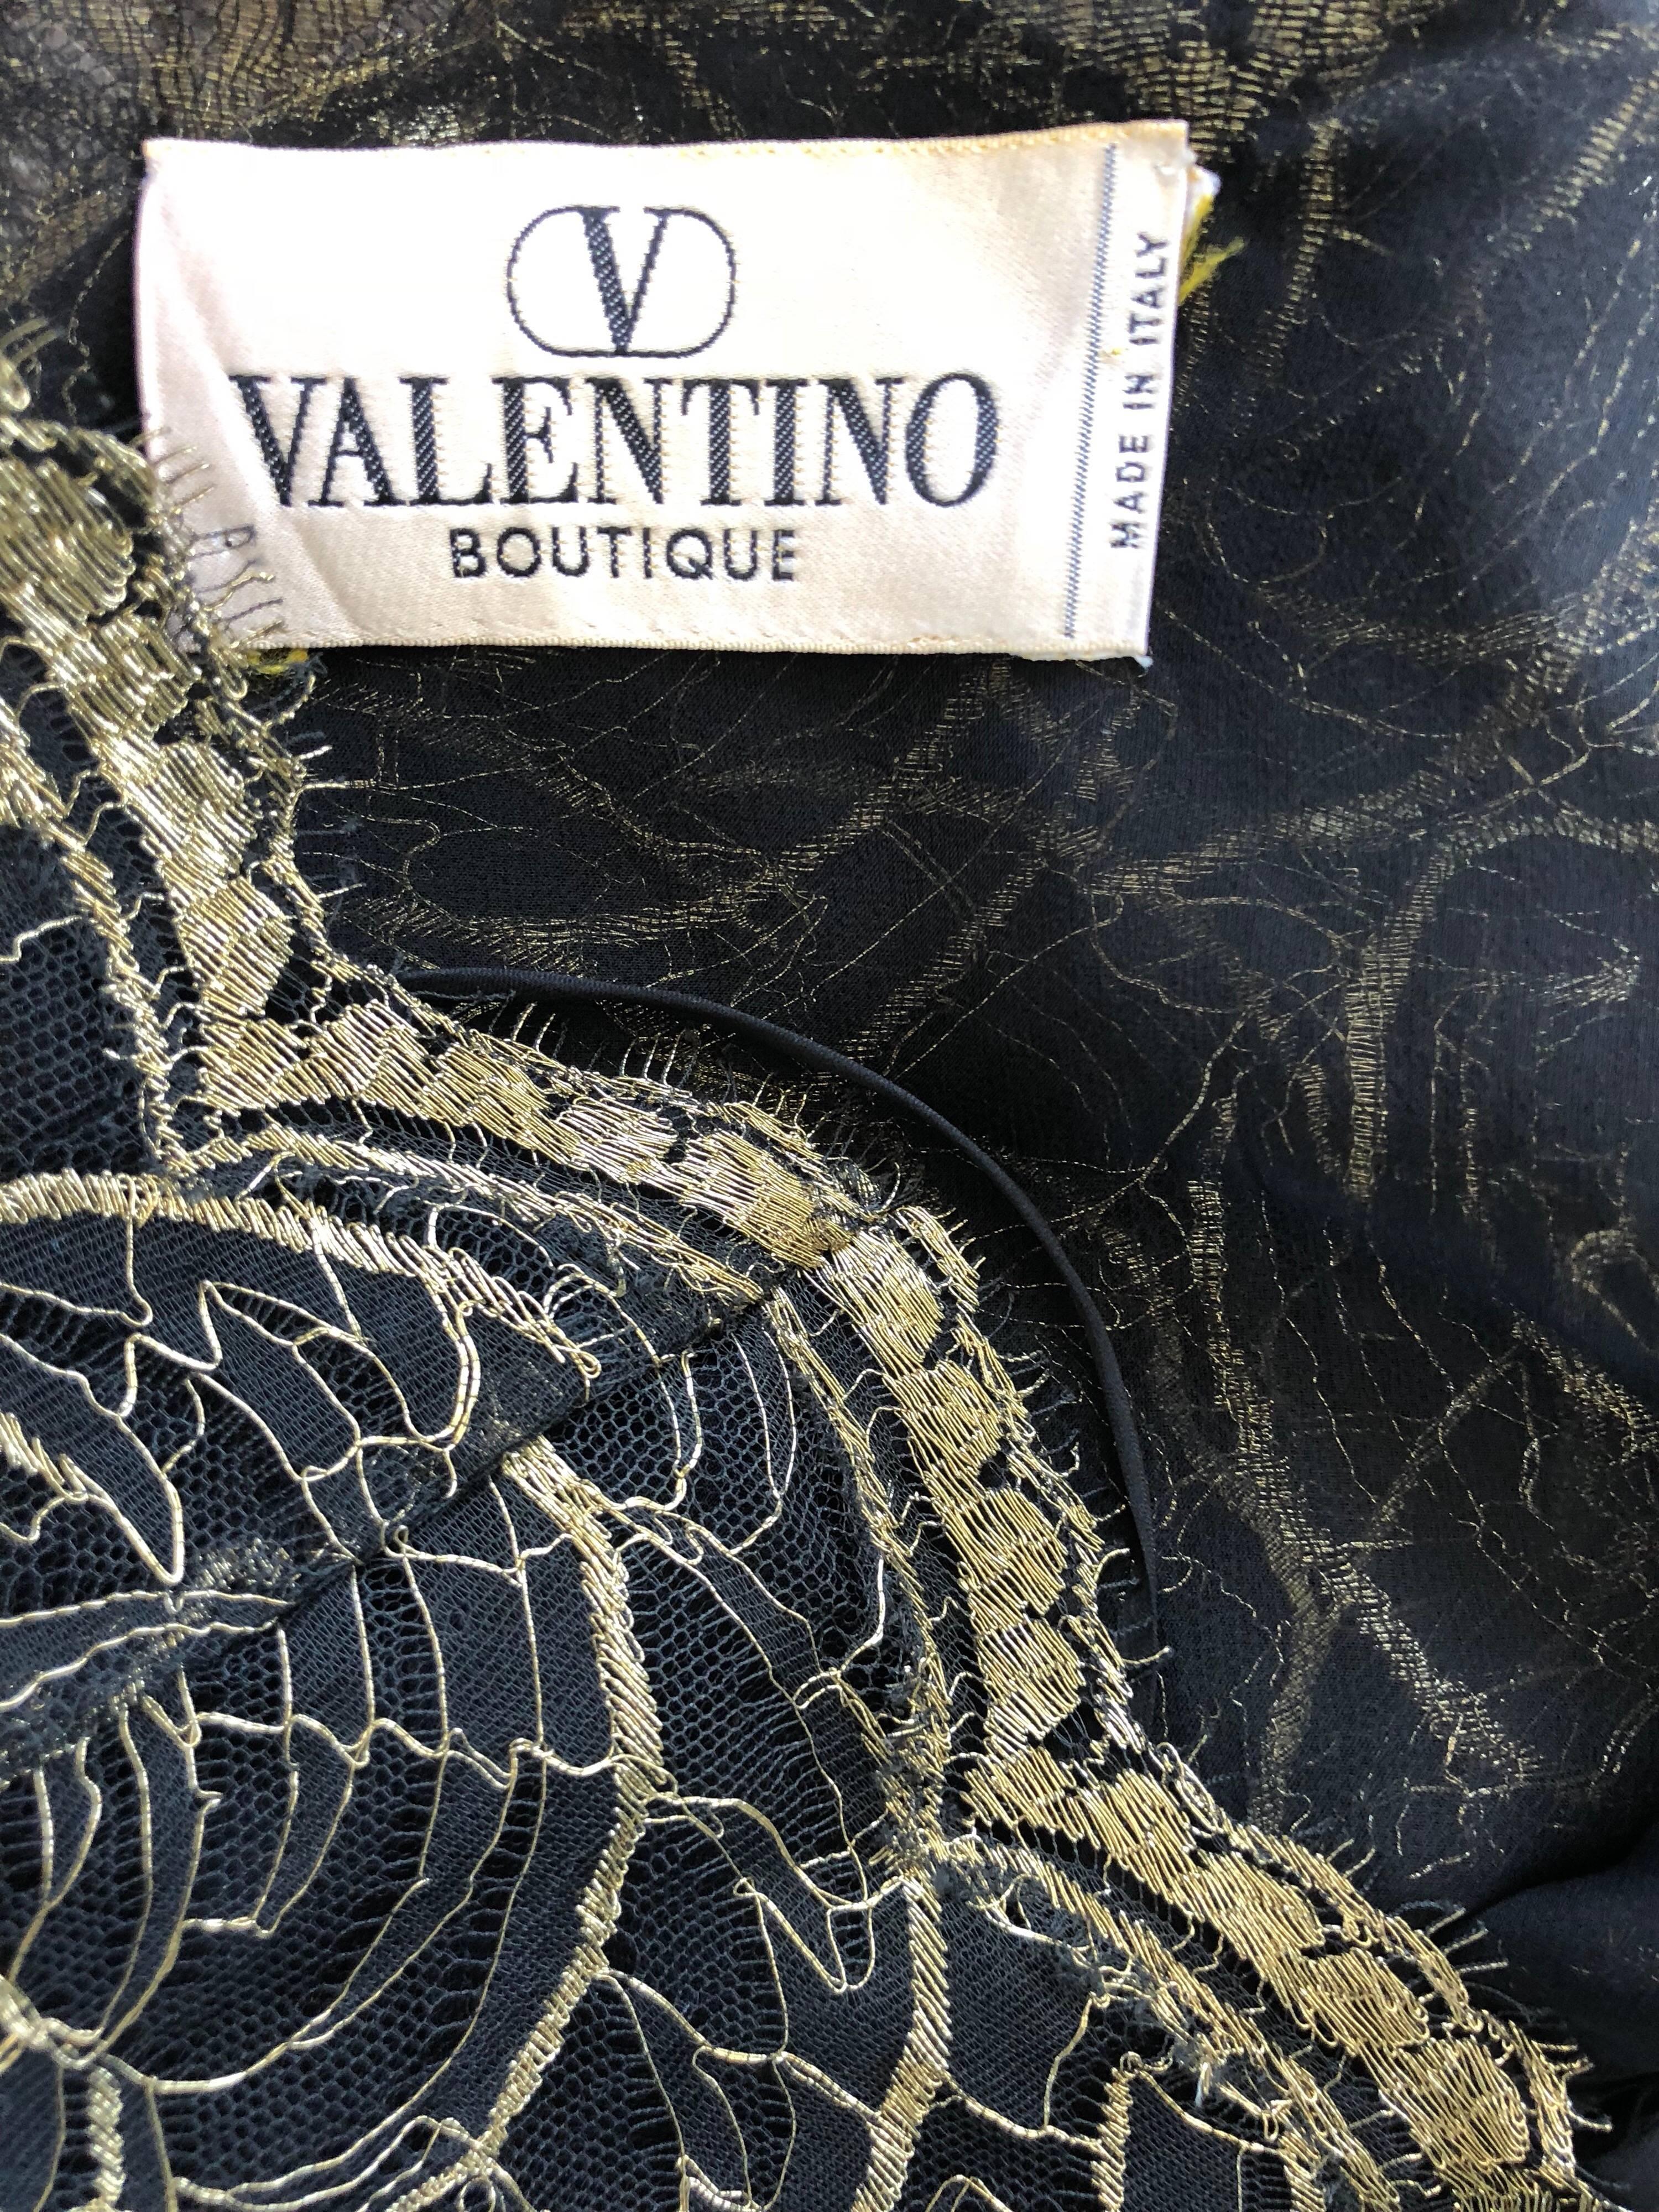 Gorgeous 1970s Valentino Couture Gold + Black Semi Sheer Silk Chiffon Lace Top 6